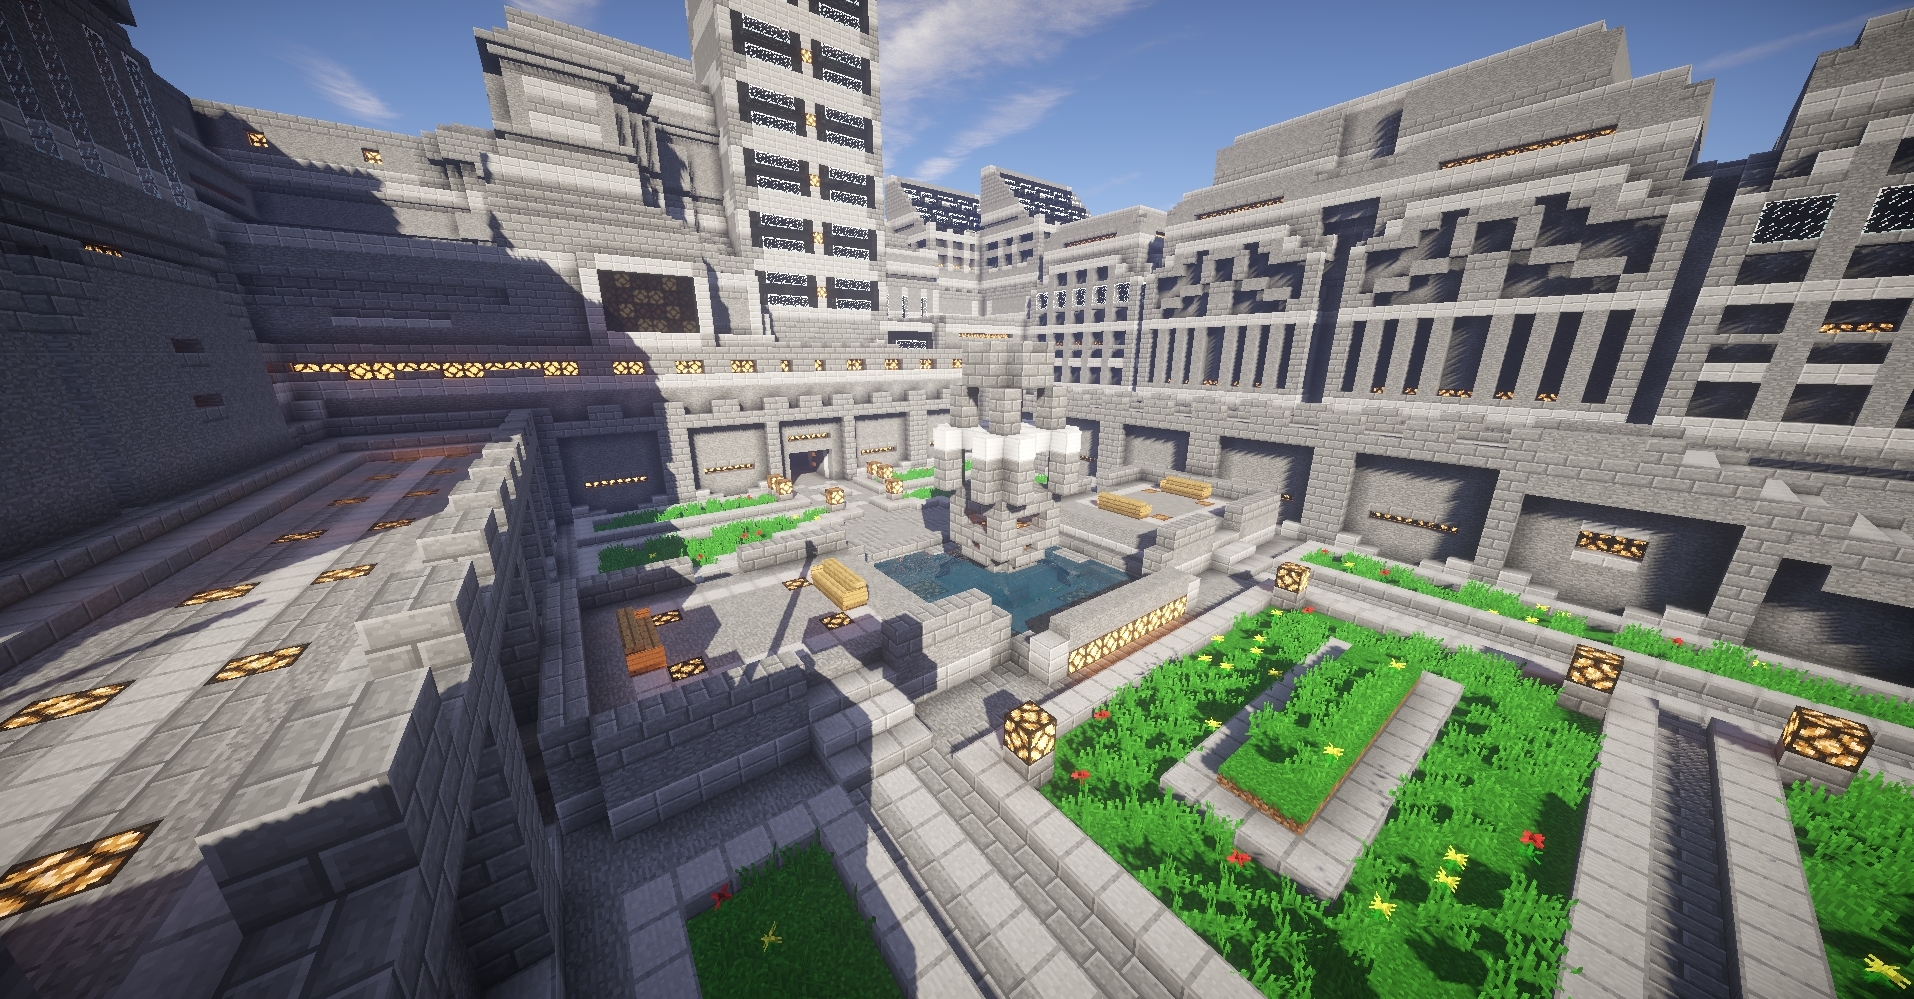 The Hunger Games The Capitol Minecraft Worlds